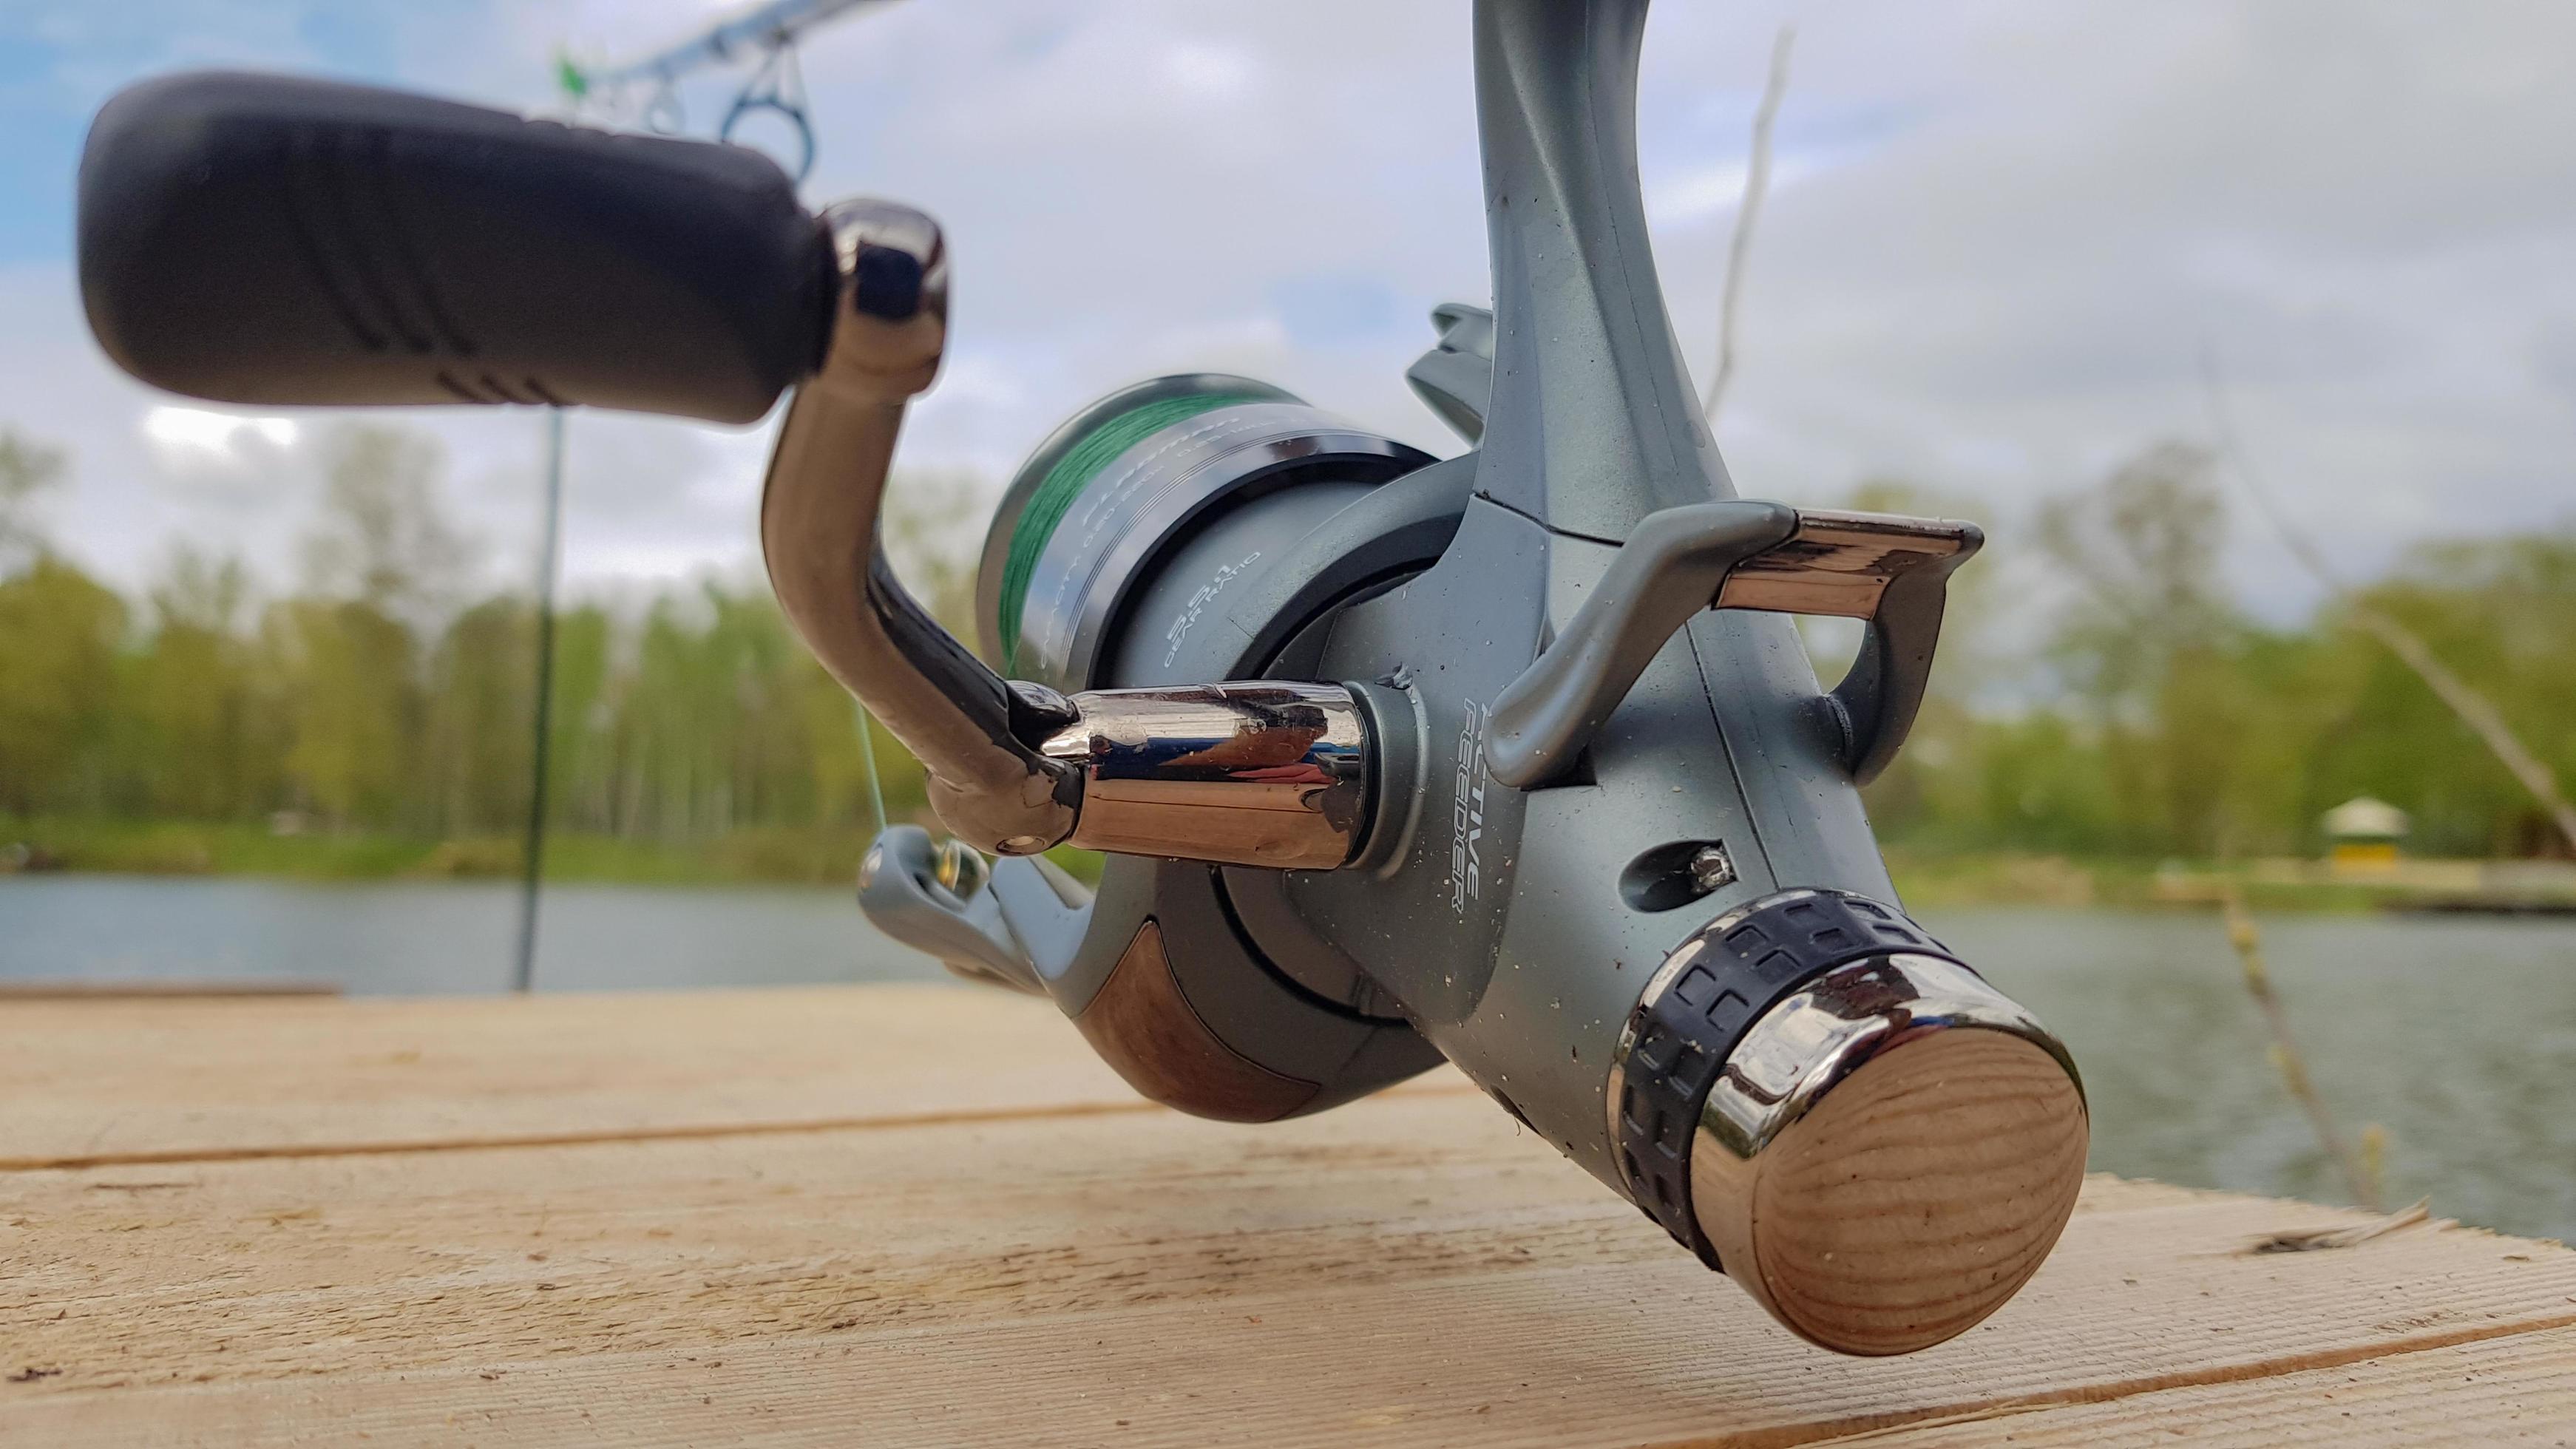 https://static.vecteezy.com/system/resources/previews/004/548/136/large_2x/carp-fishing-rod-isolated-on-the-lake-and-wooden-bridge-carp-feeder-spinning-reel-close-up-fishing-for-carp-on-the-lake-fisherman-s-equipment-ukraine-kiev-june-09-2021-free-photo.jpg